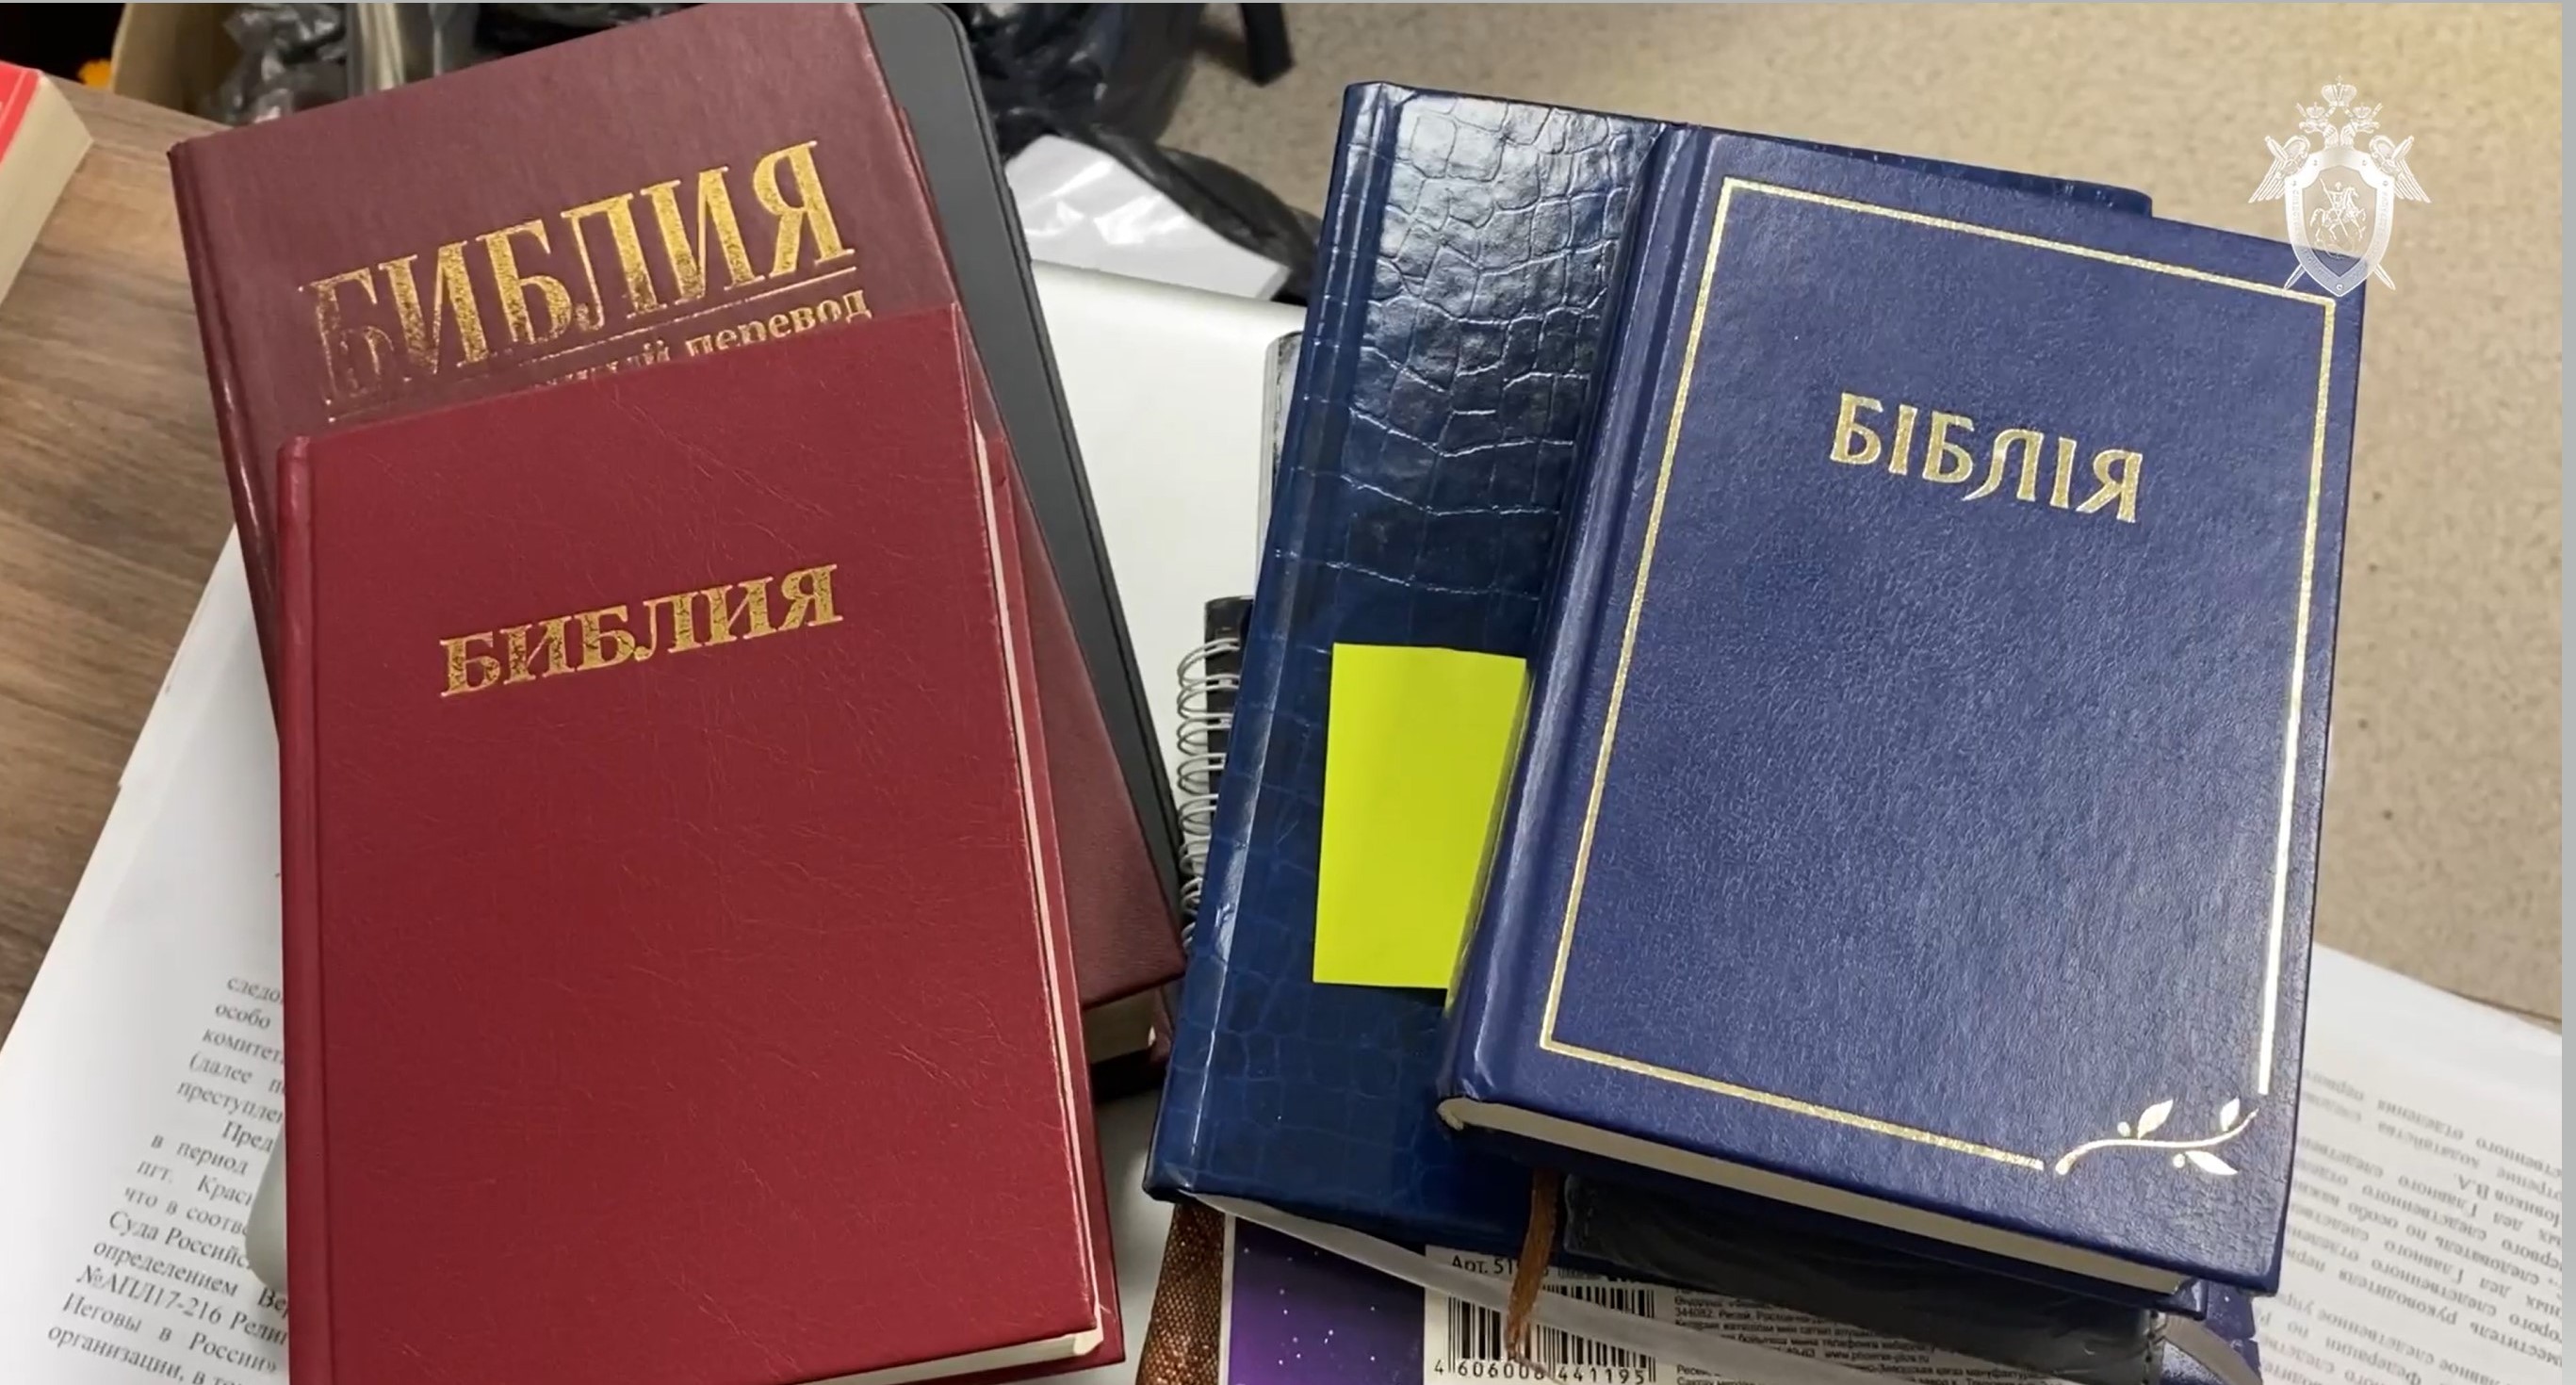 The Bible in Ukrainian and Russia during the armed searches in December 2022 Screenshot from the video posted on 22 December 2022